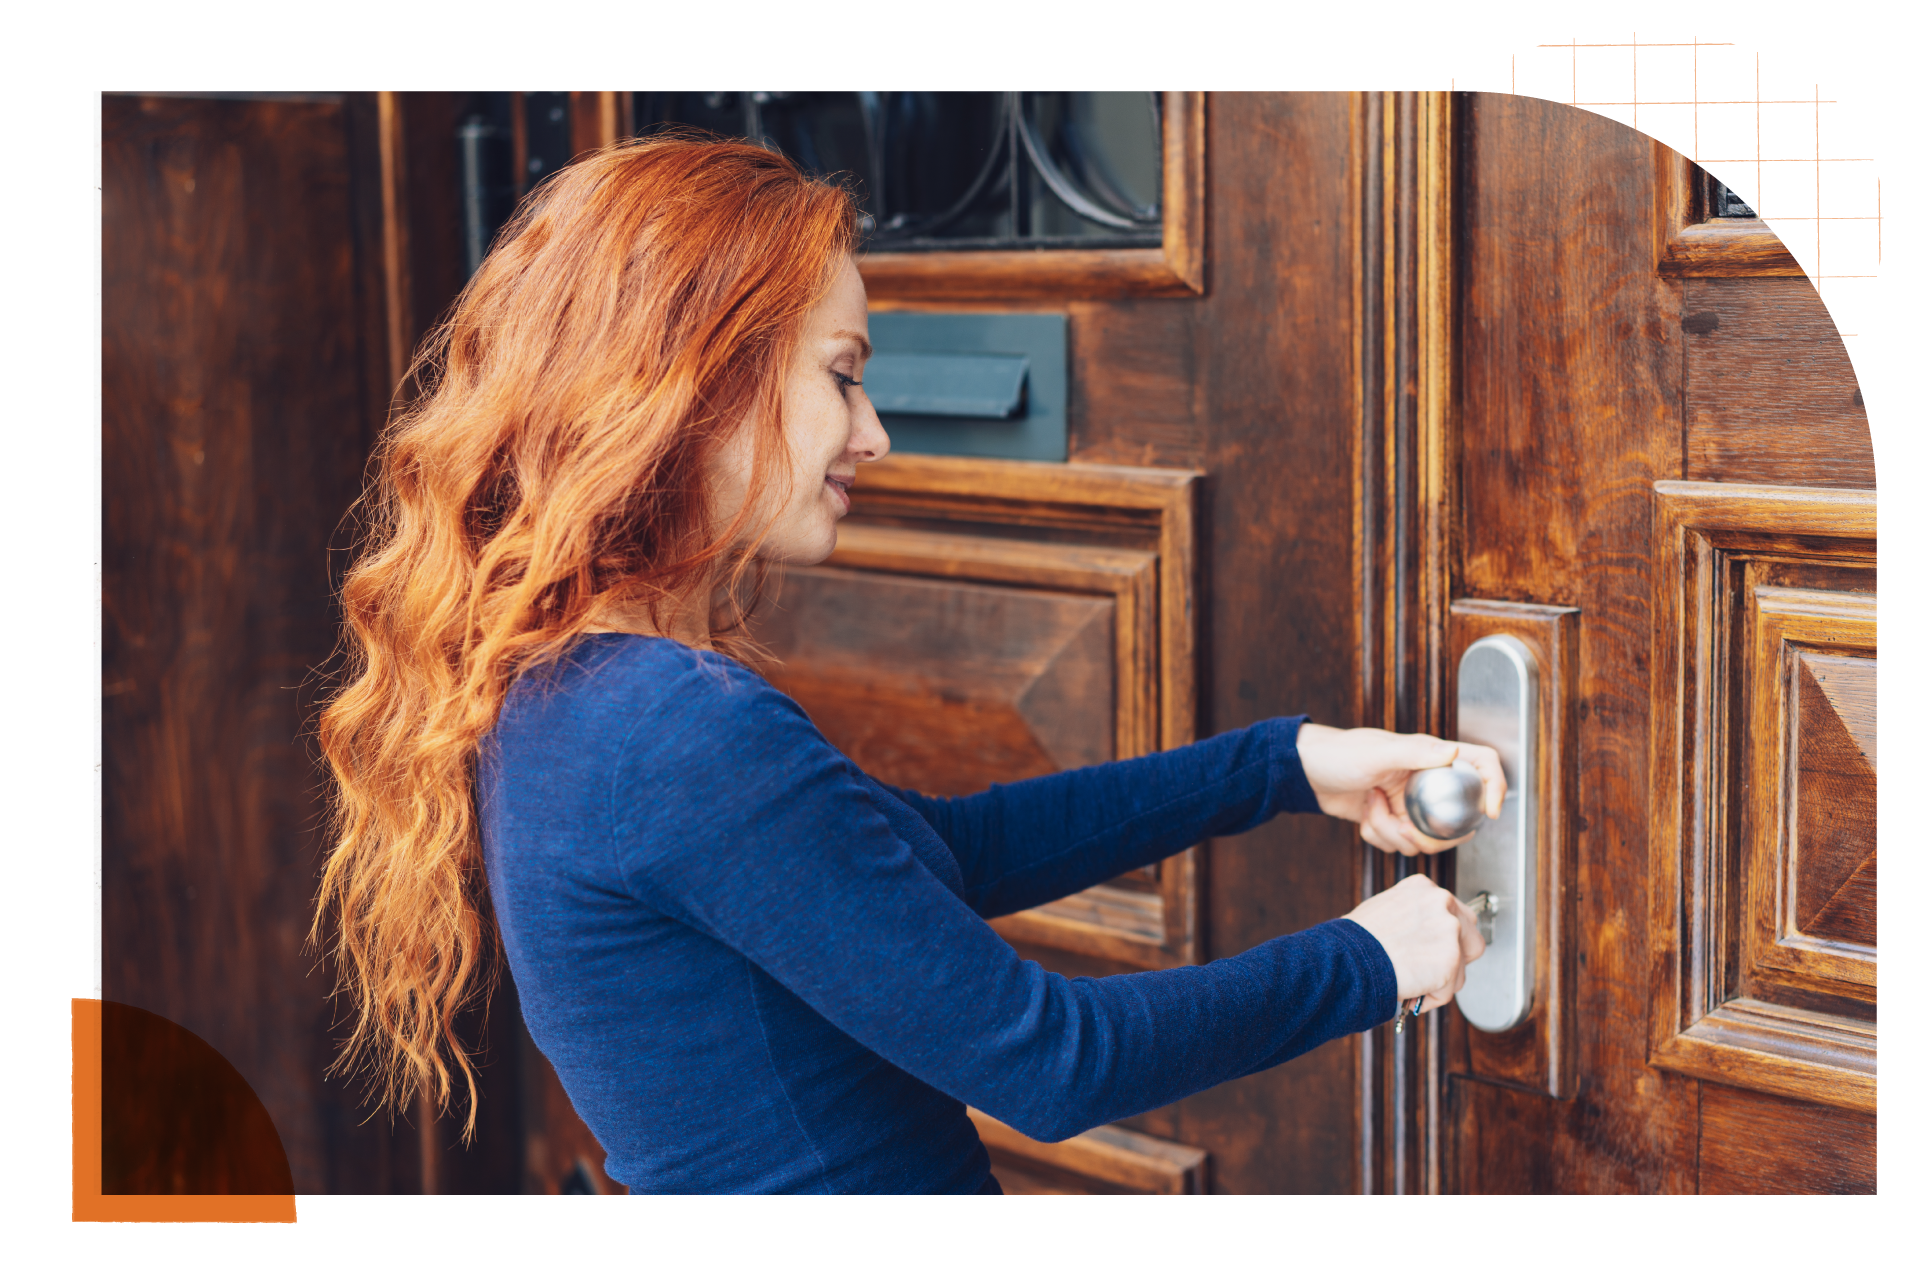 A young woman with long way red hair in a blue long sleeve shirt is opening the door to a home with keys. There are various shapes and grid lines scattered around the image.